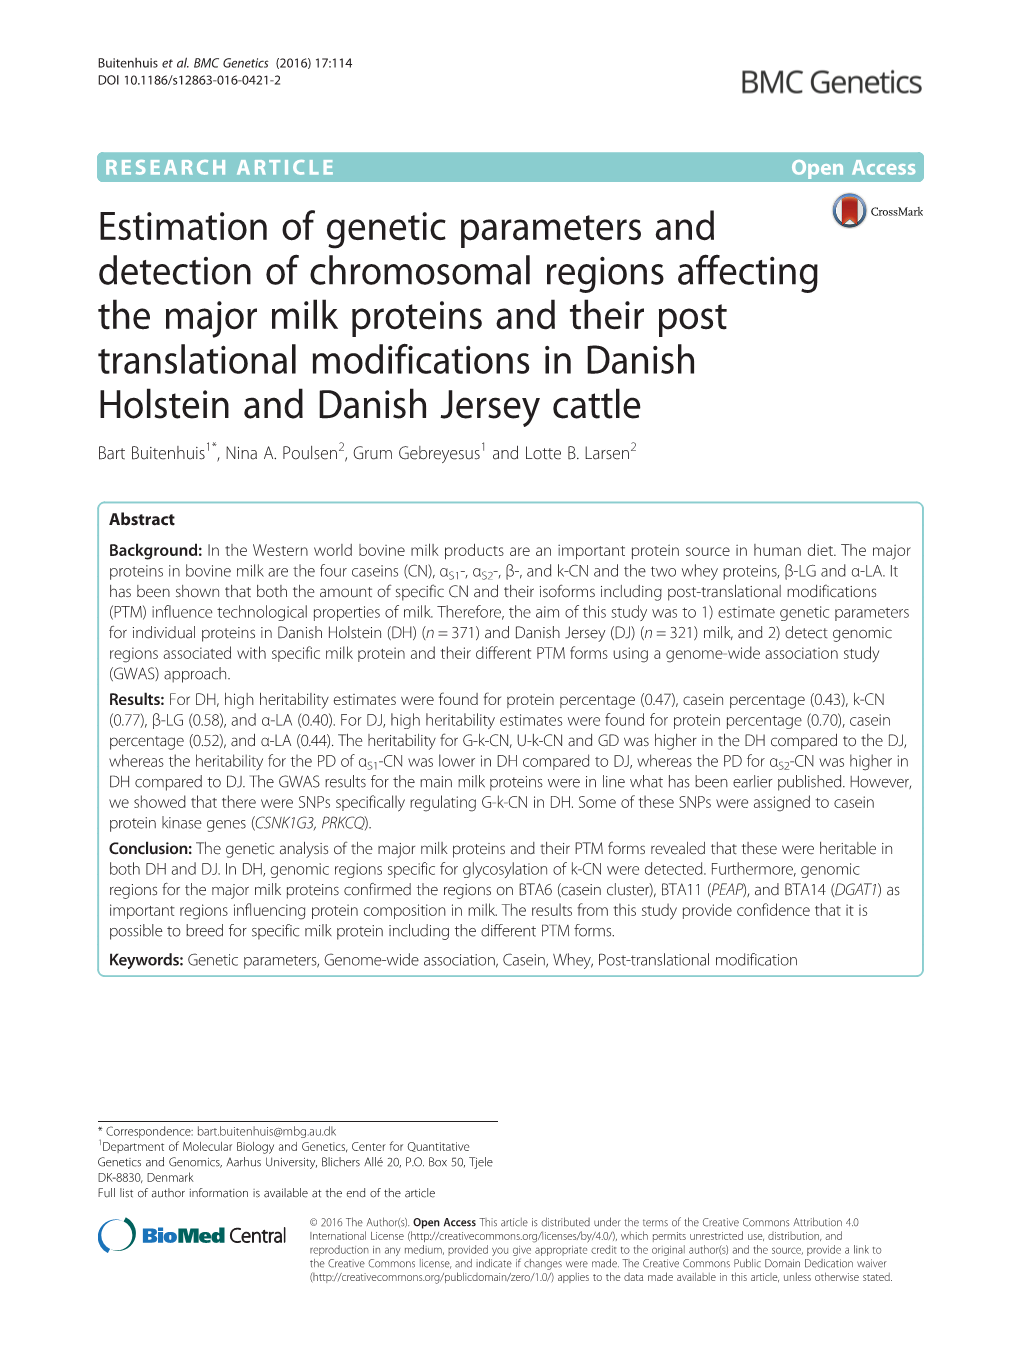 Estimation of Genetic Parameters and Detection of Chromosomal Regions